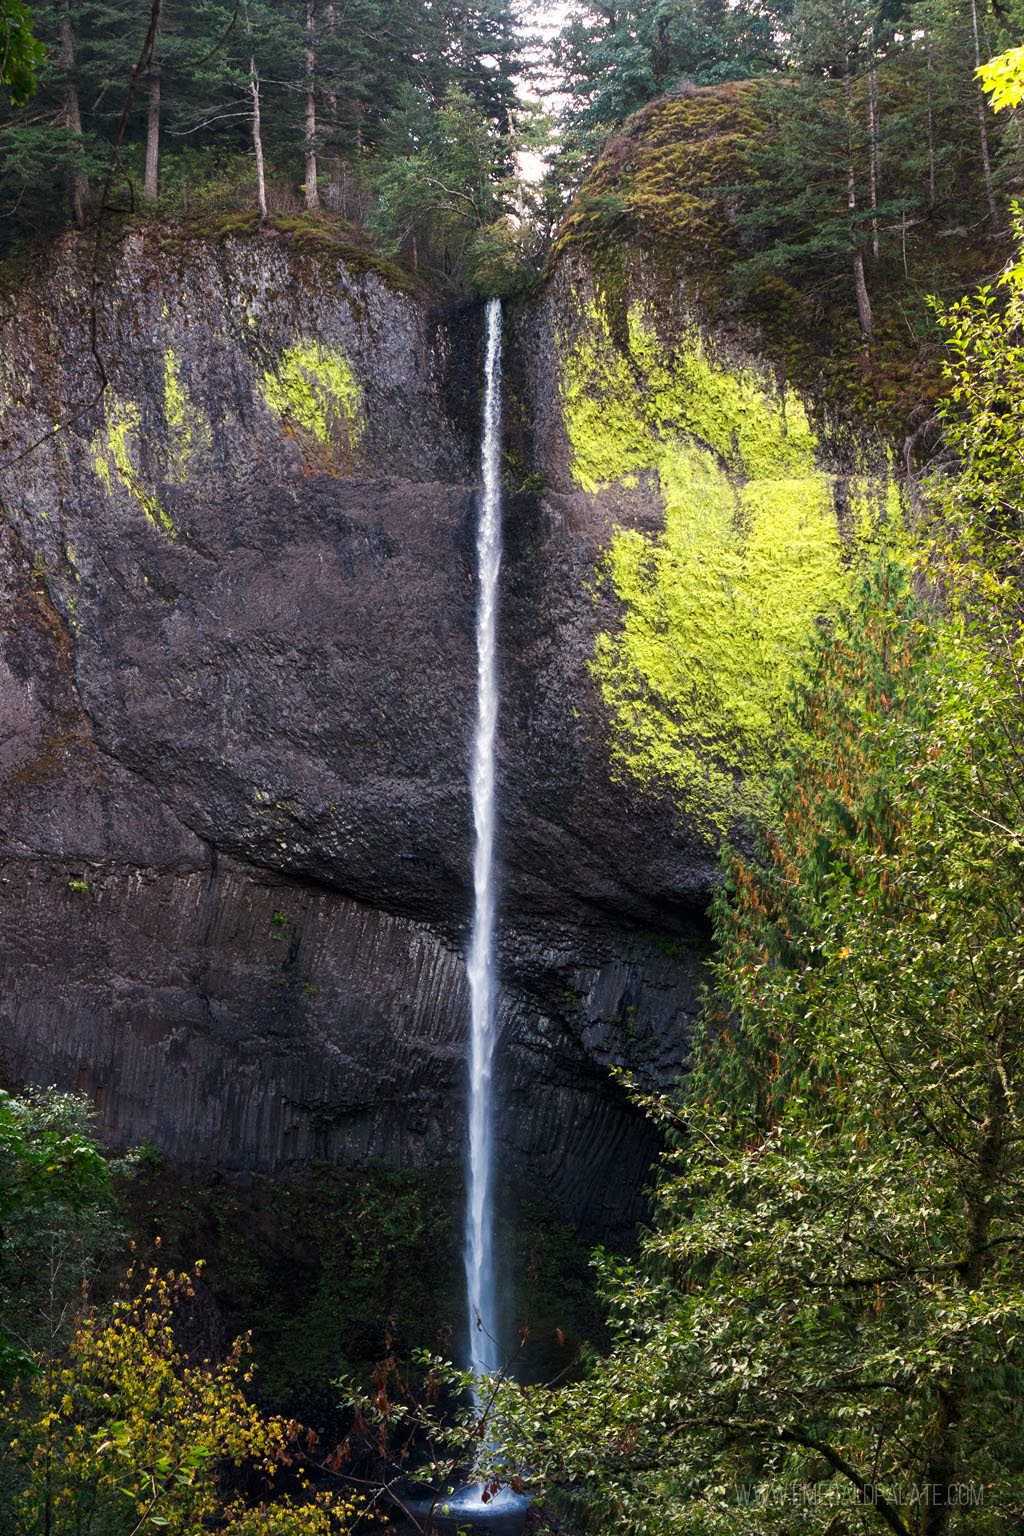 Latourell Falls, a must see on any Columbia River Gorge itinerary